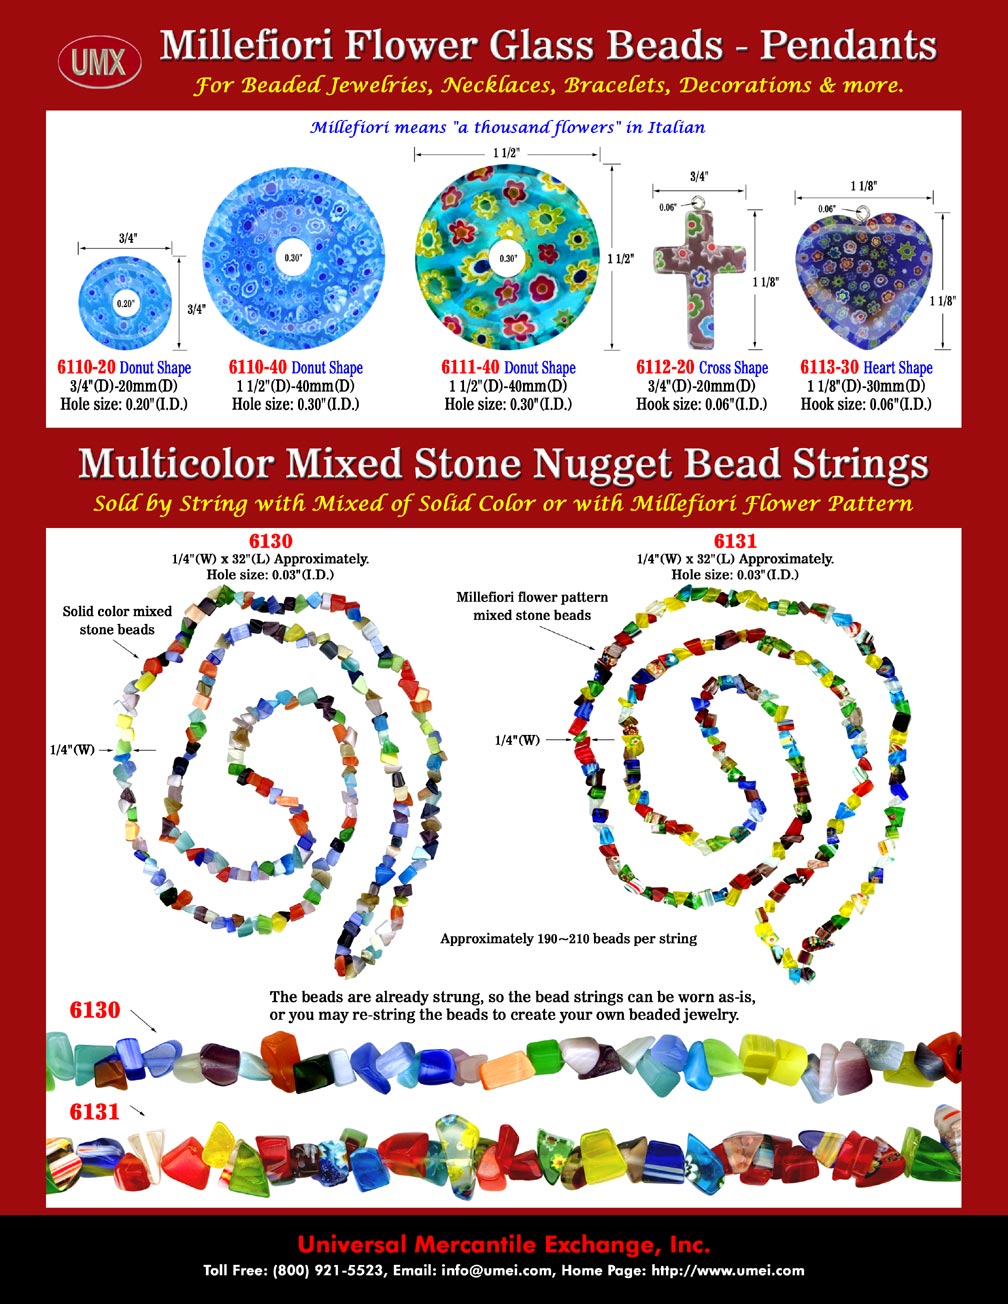 Eye catching wholesale semi-precious millefiori stone beads and wholesale multi-color stone beads come with mixed nugget and chip shape stone beads.